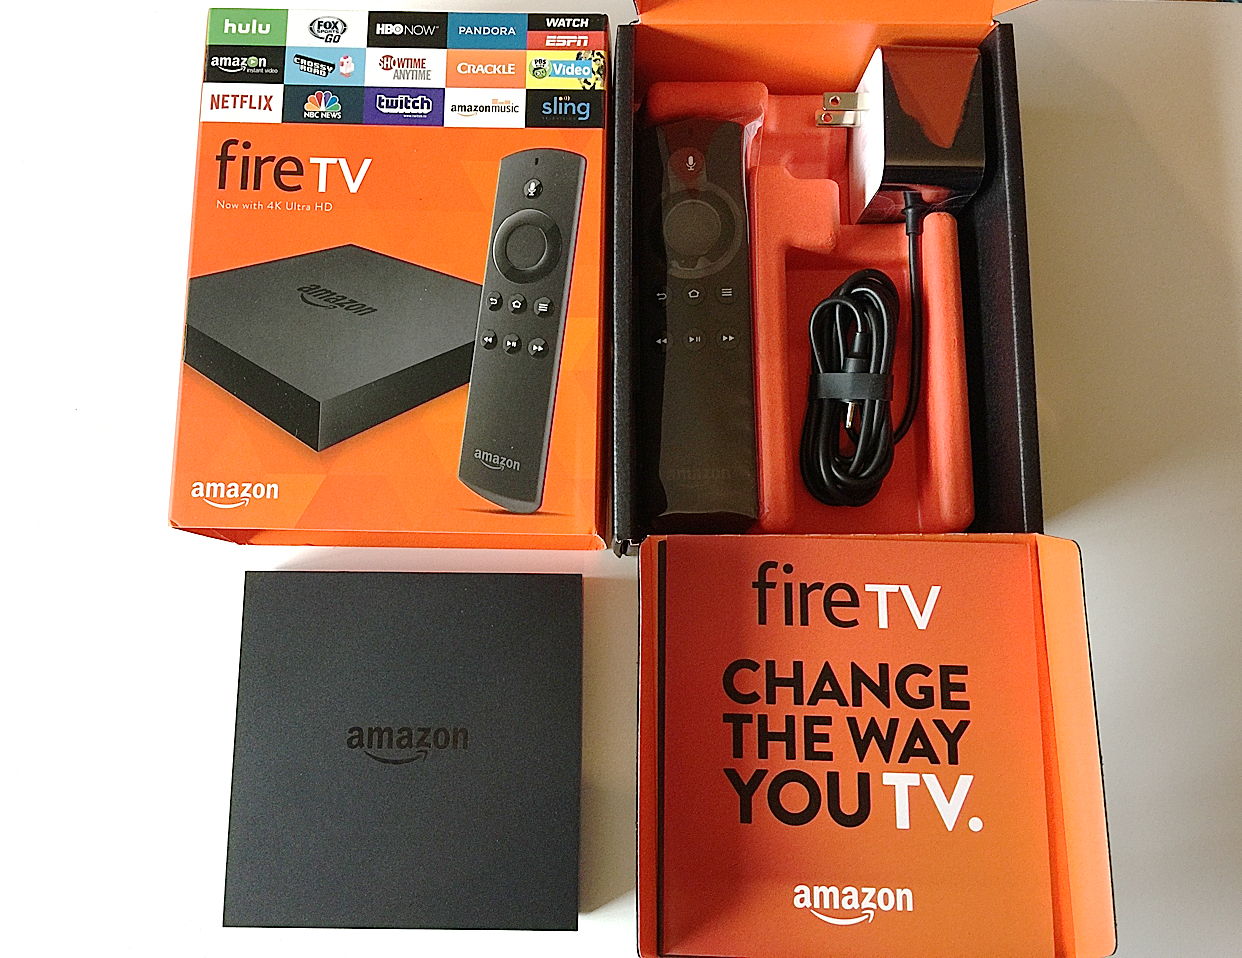 Amazon Fire TV (2015) Review: Don't Buy it for the 4K